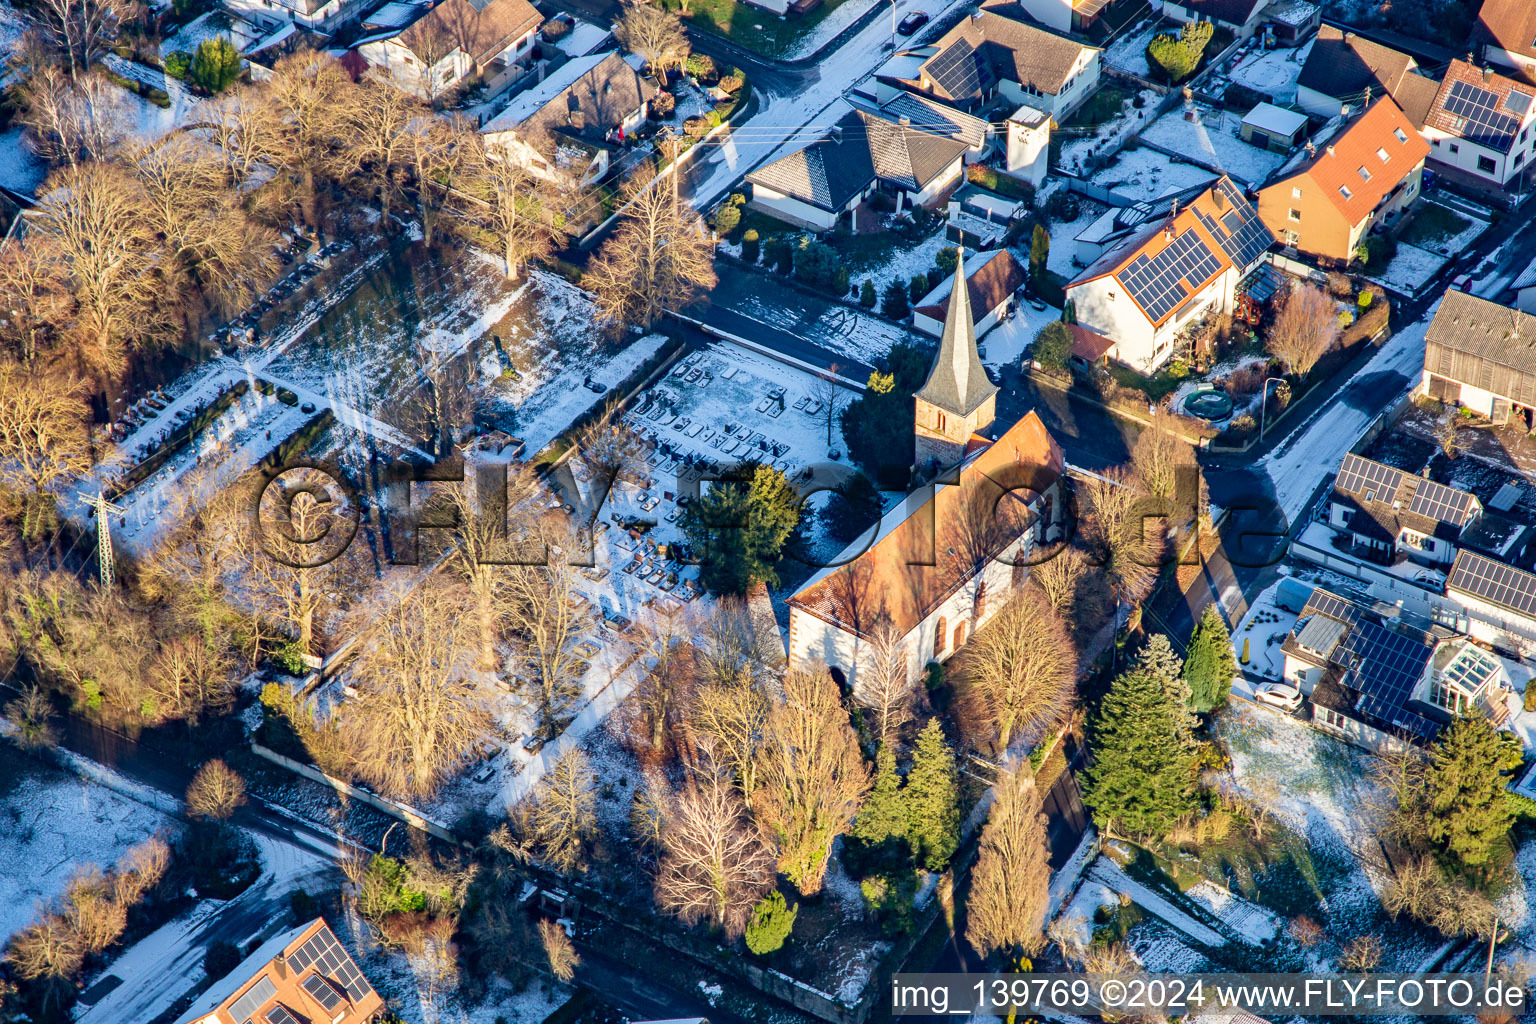 Wolfgang's Church and cemetery in winter with snow in Freckenfeld in the state Rhineland-Palatinate, Germany